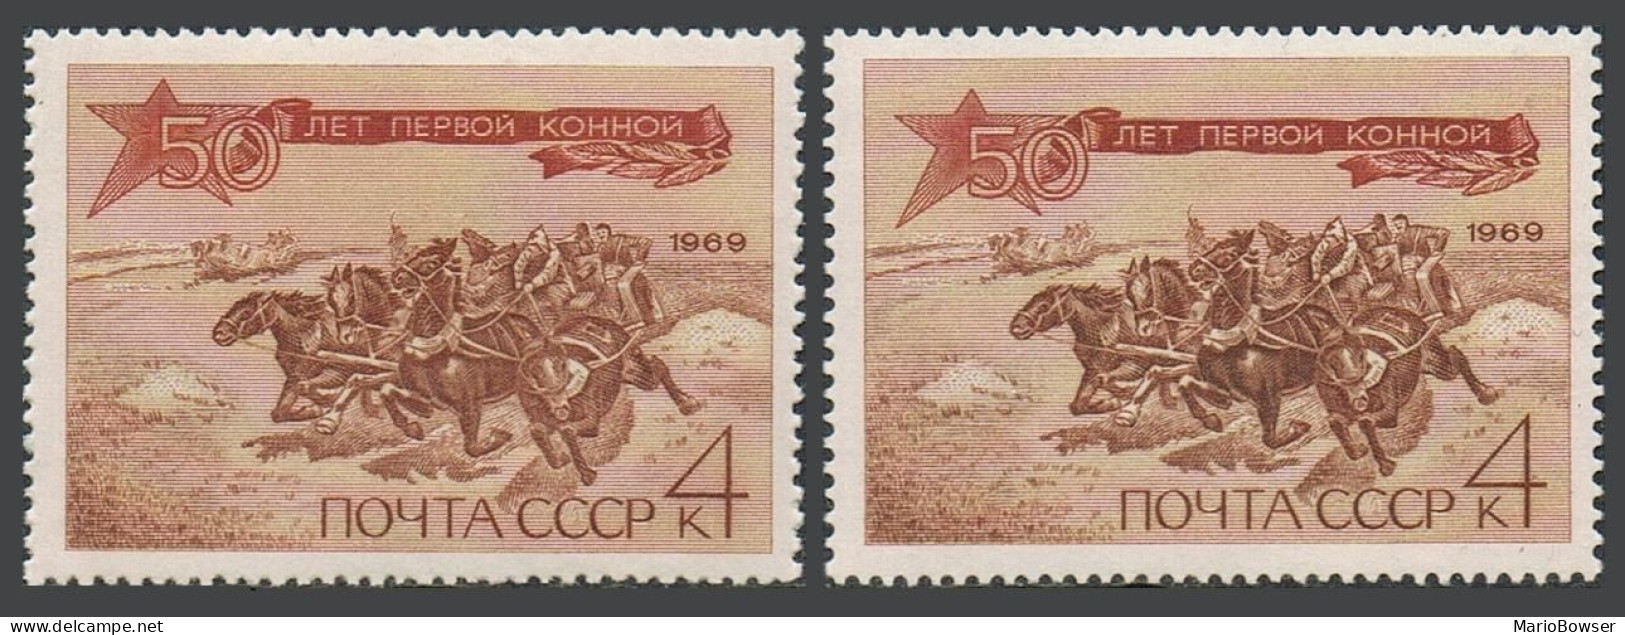 Russia 3623 Two Varieties,MNH.Michel 3650. First Mounted Army,50th Ann.1969. - Unused Stamps